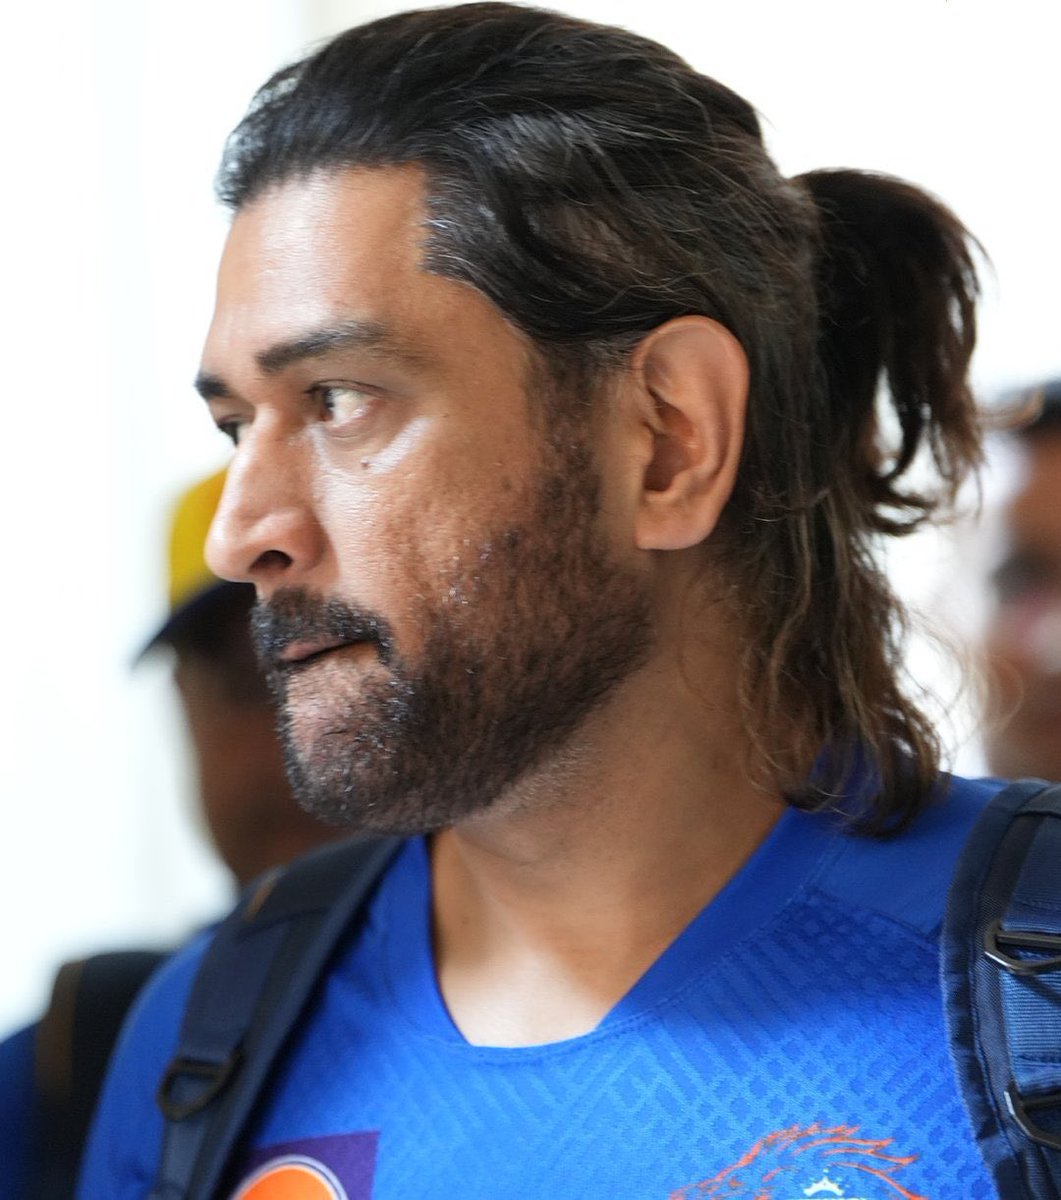 Drop an emoji to describe this picture of Dhoni. We’ll start with 🔥🤩